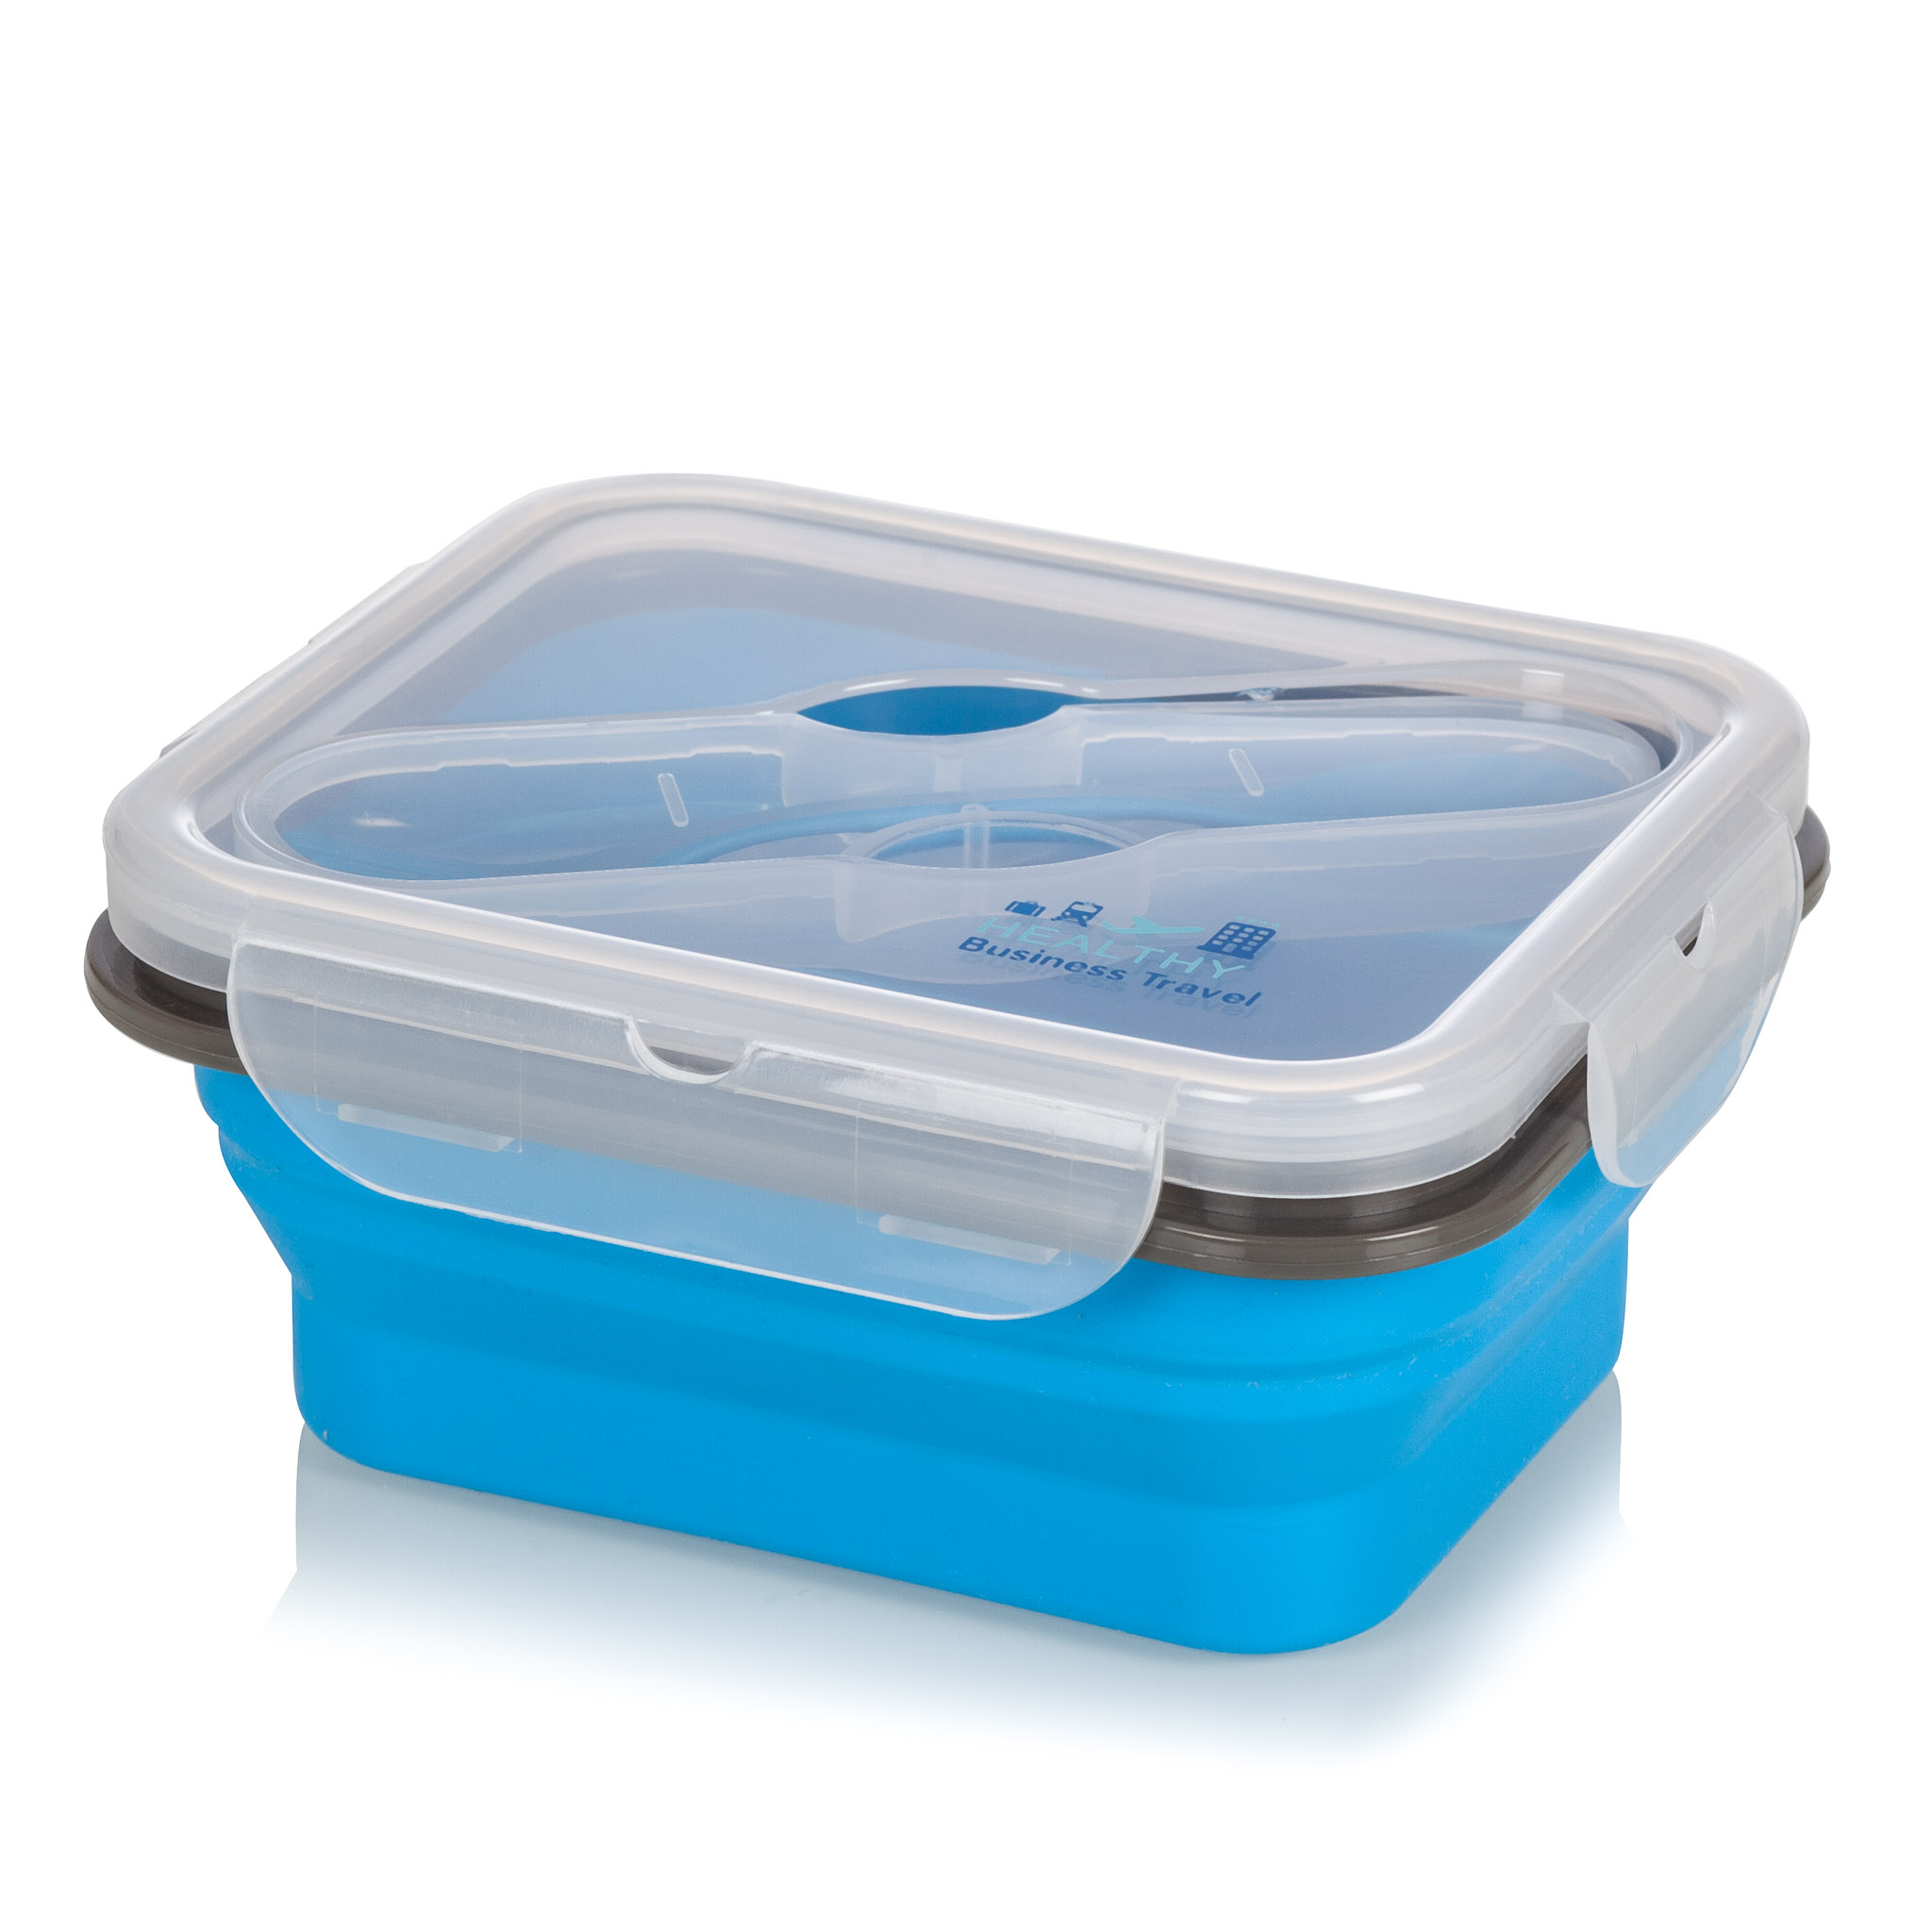 https://www.healthybusinesstravel.shop/wp-content/uploads/2021/01/HBT-1015-Edit-blue-fully-extended-containers-Web-Res.jpg